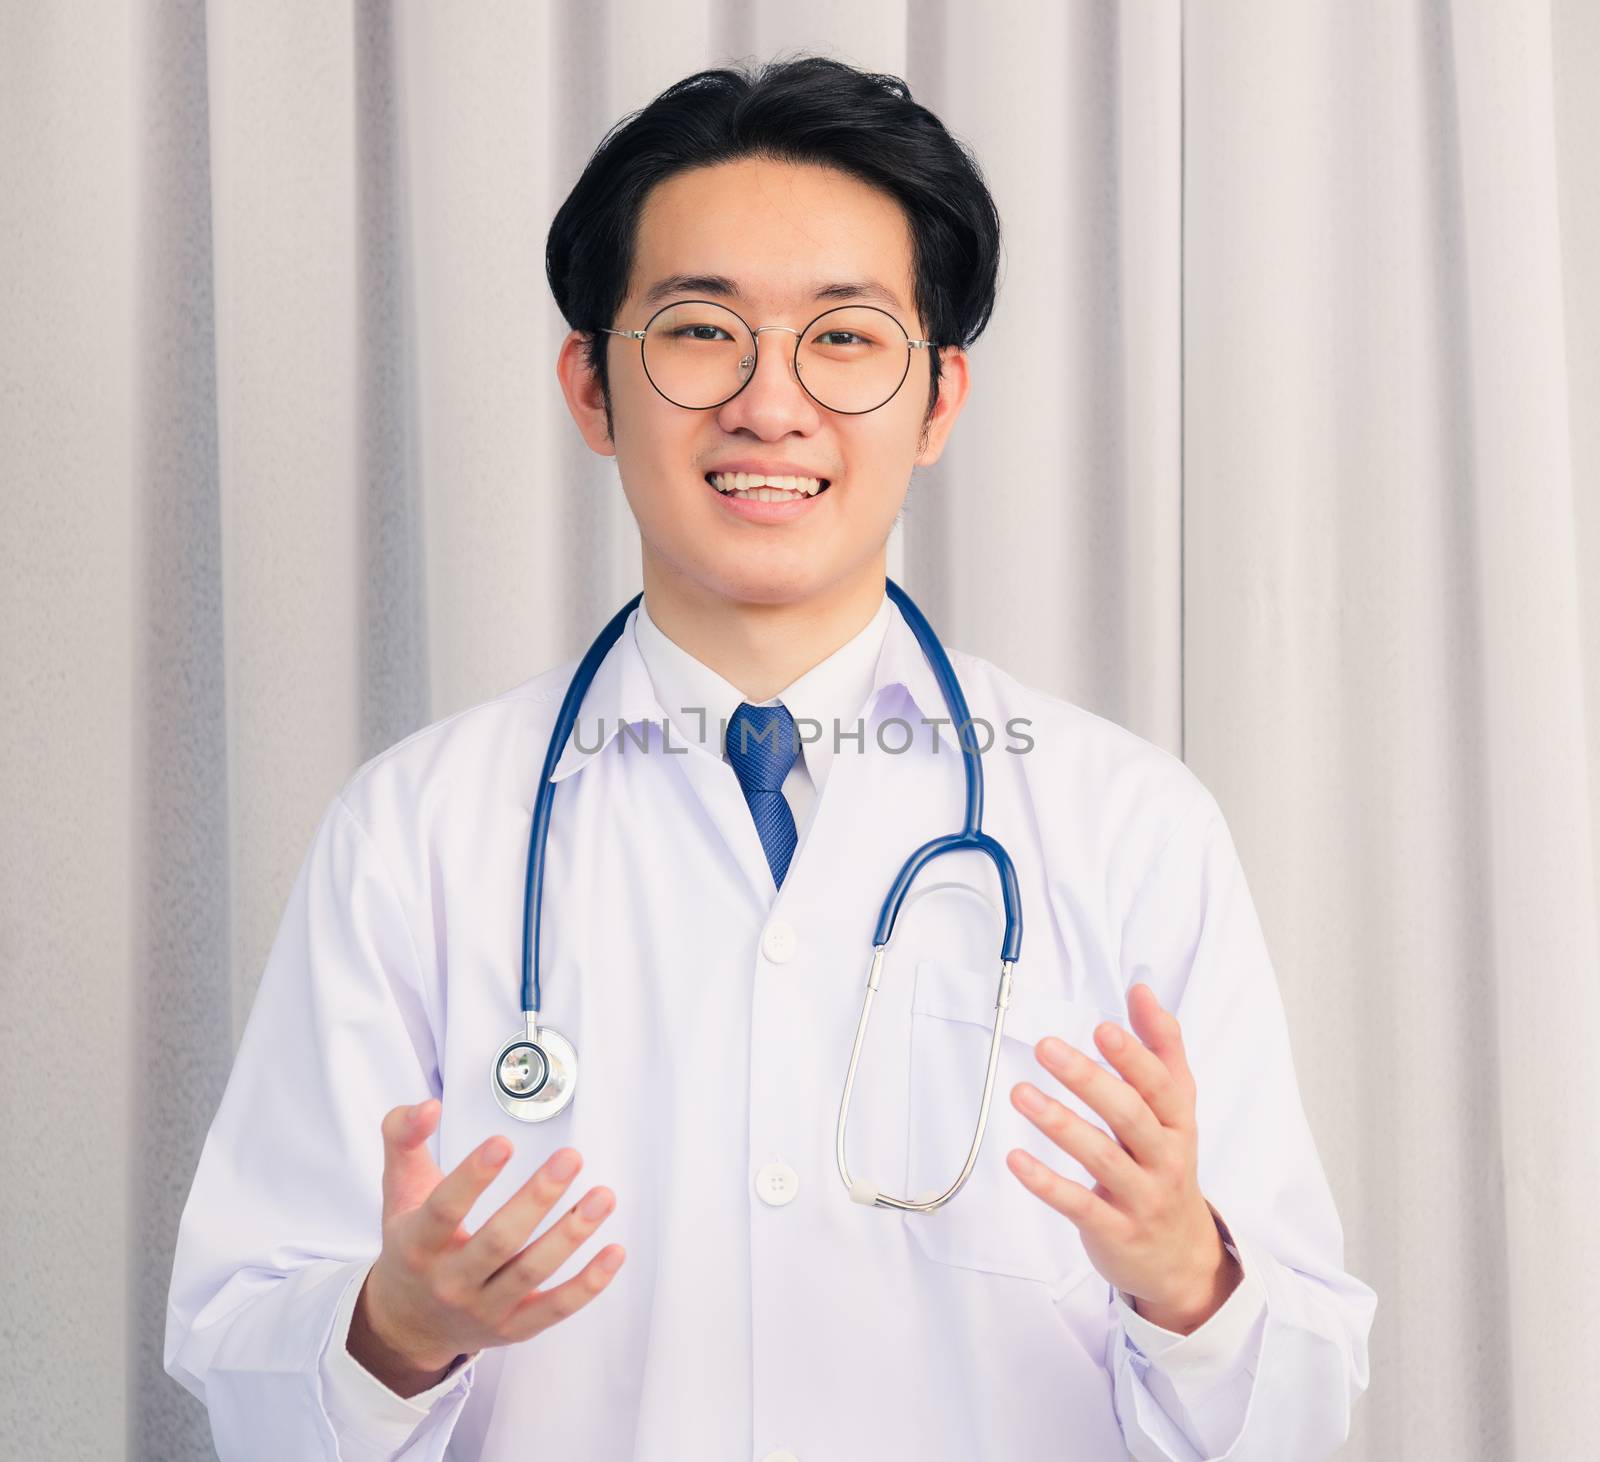 Portrait of Happy Asian young doctor handsome man smiling in uniform with stethoscope talking online video conference call or facetime raise his hand to explain, healthcare medicine concept